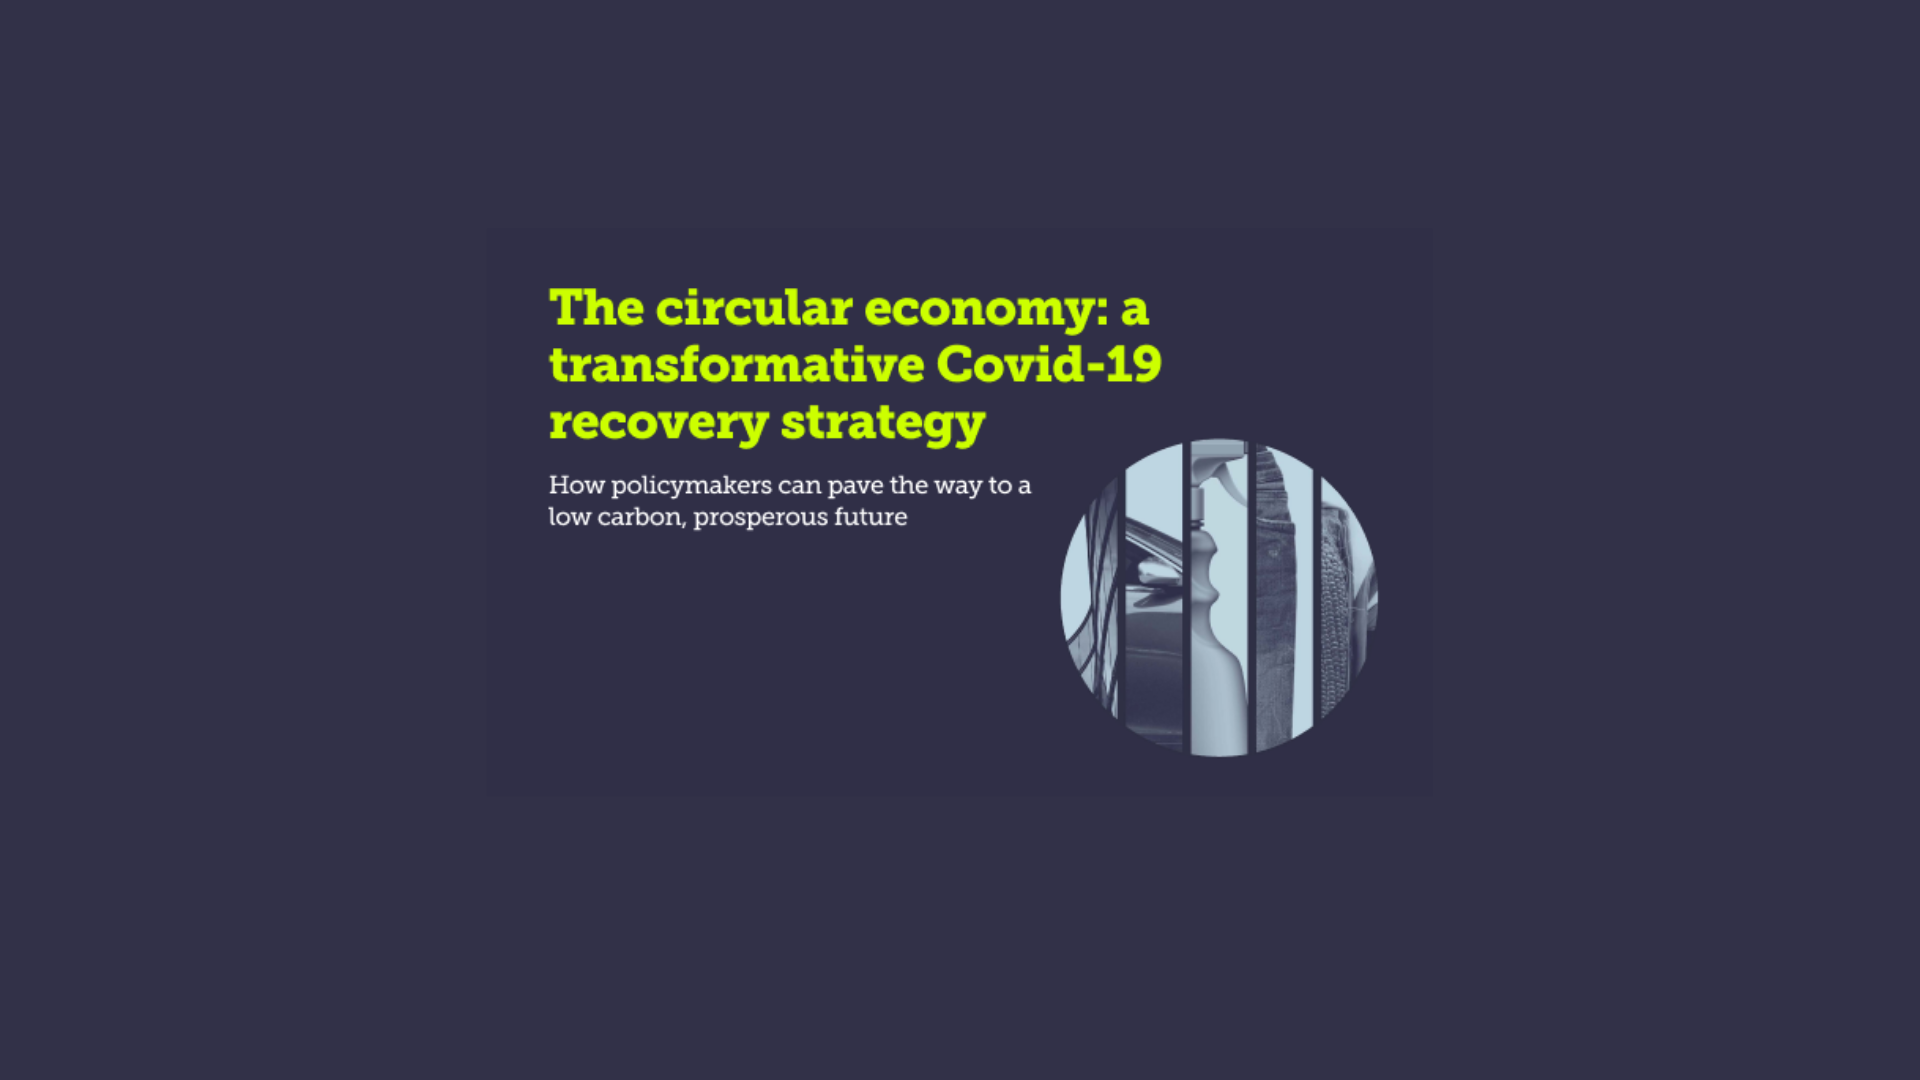 A COVID-19 Recovery Strategy trough Circular Economy